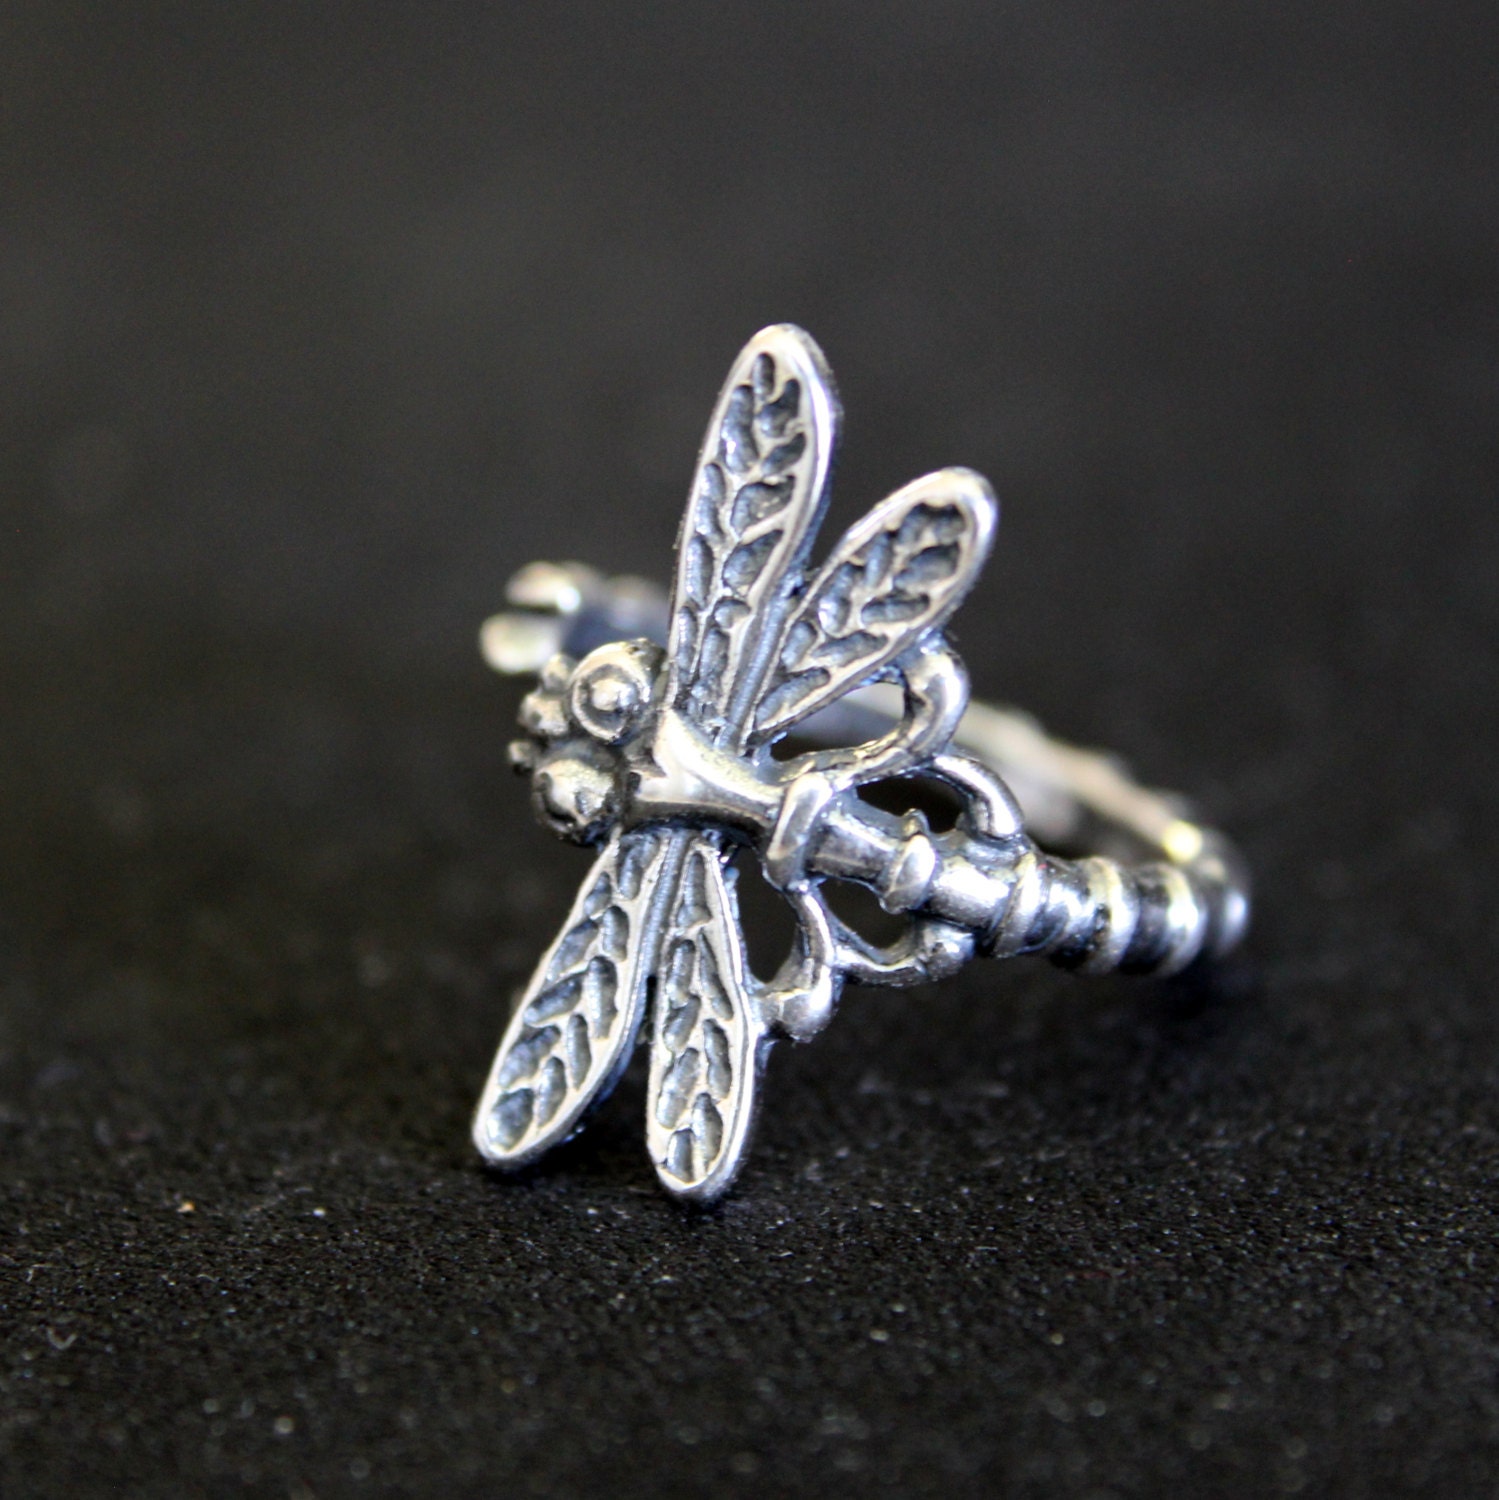 Silver Dragonfly Ring with Sterling Overlay Dragonfly Wrap Ring